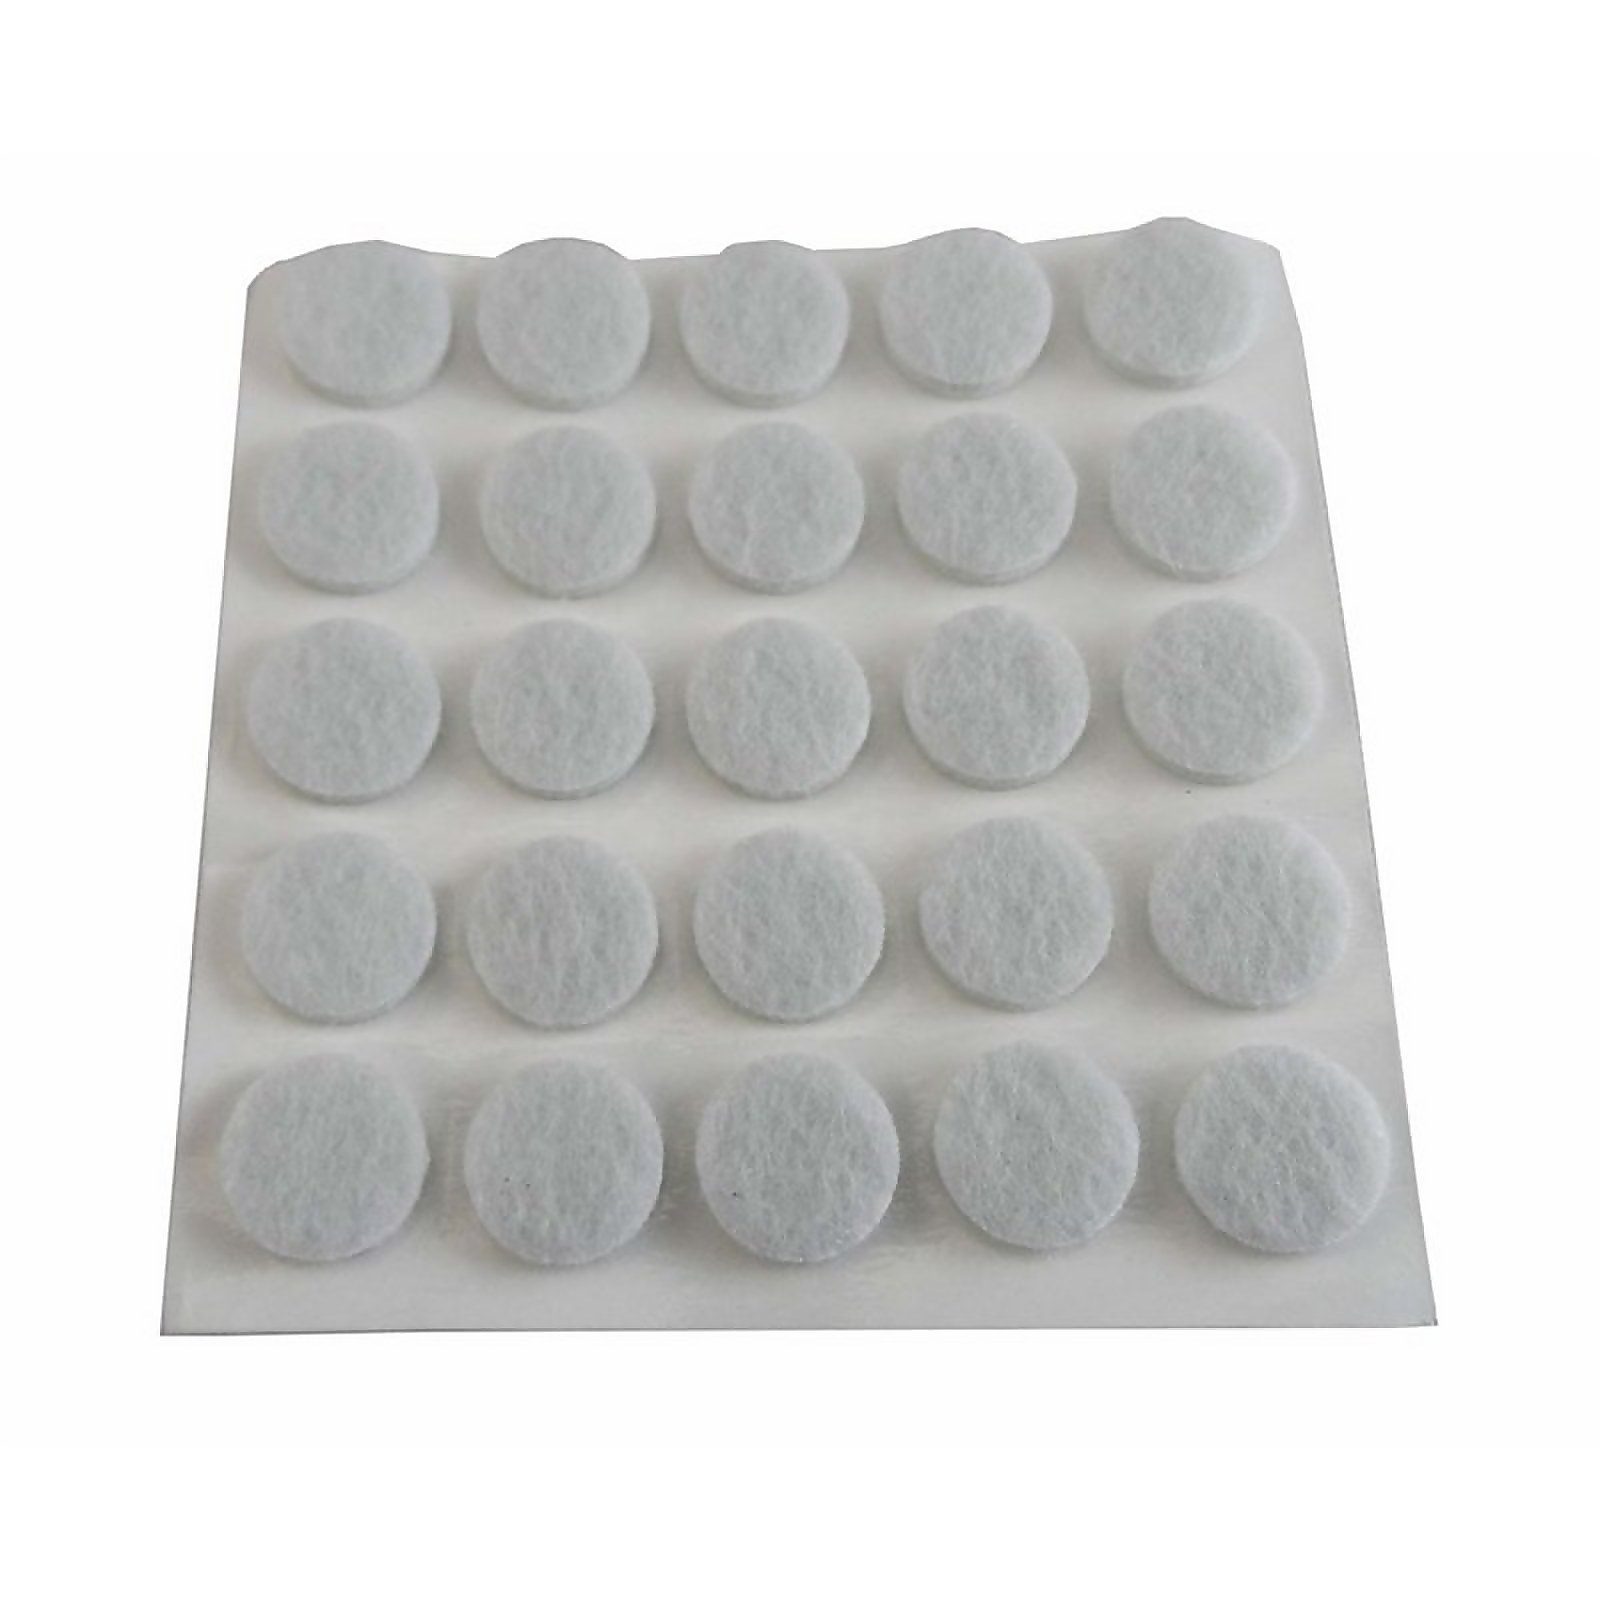 Photo of Protective Pad White 10mm - 75 Pack